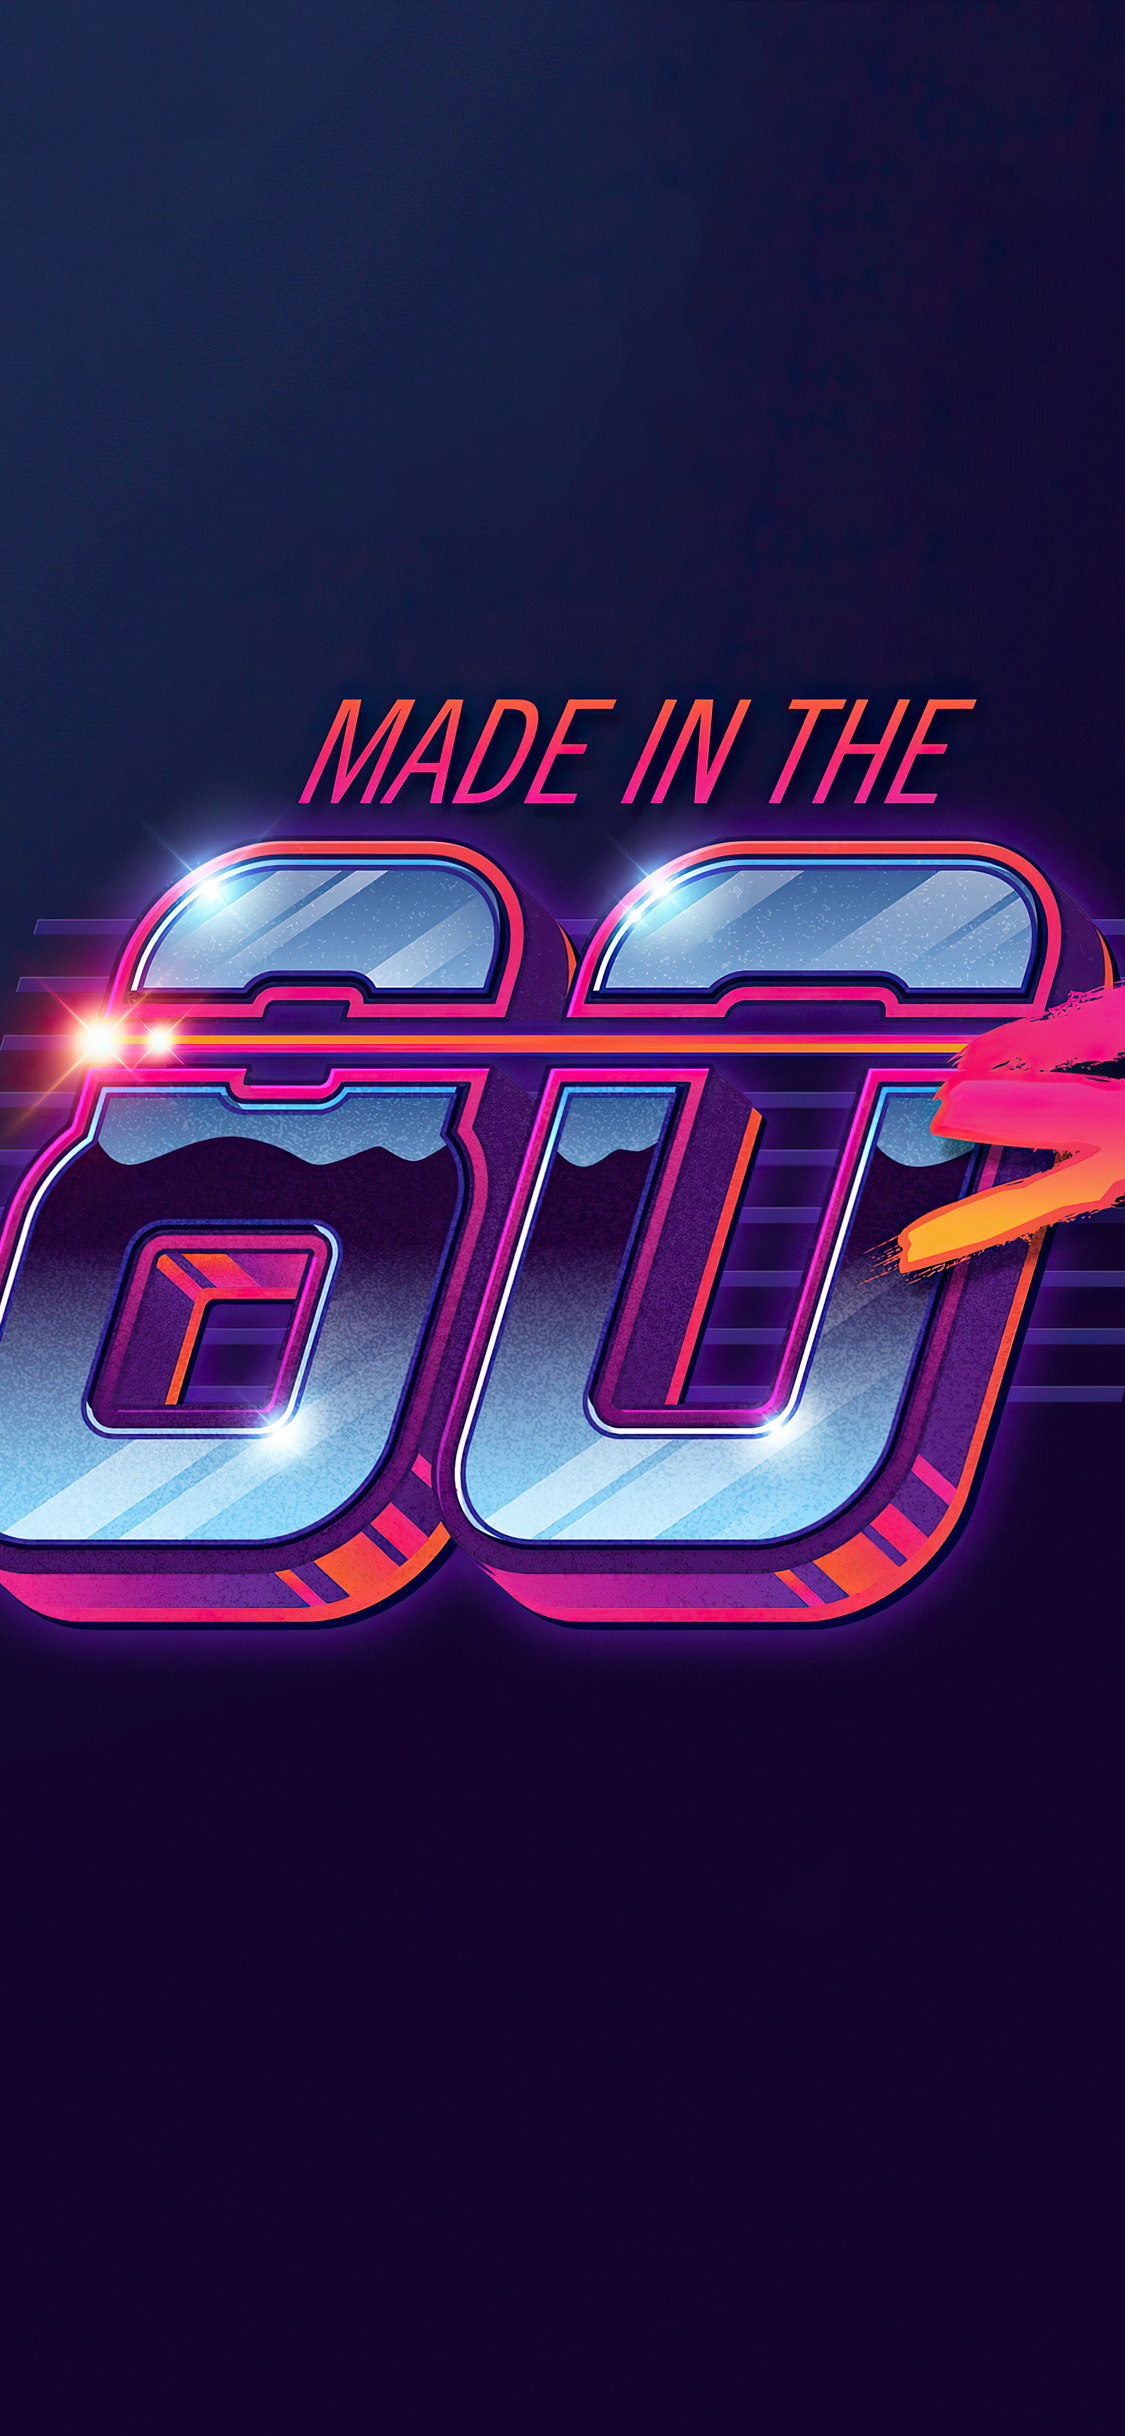 Share 51+ 80's vibe wallpaper best - in.cdgdbentre